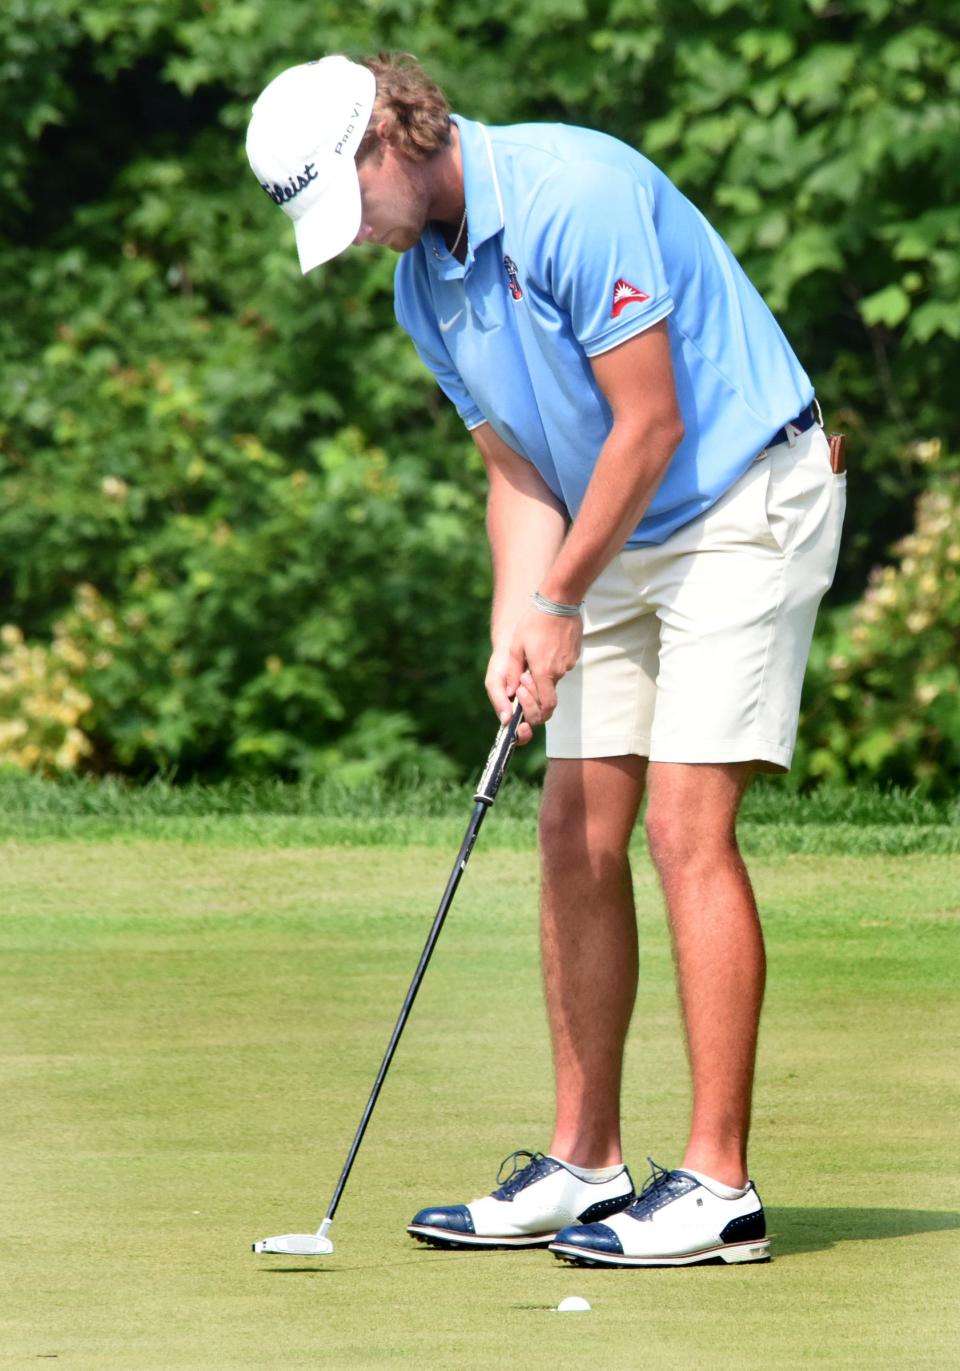 Evan Barbin of Red Lion Christian, the DHSGCA Boys Golfer of the Year, holes his final putt during the DIAA Golf Tournament on June 1 at Odessa National Golf Club.